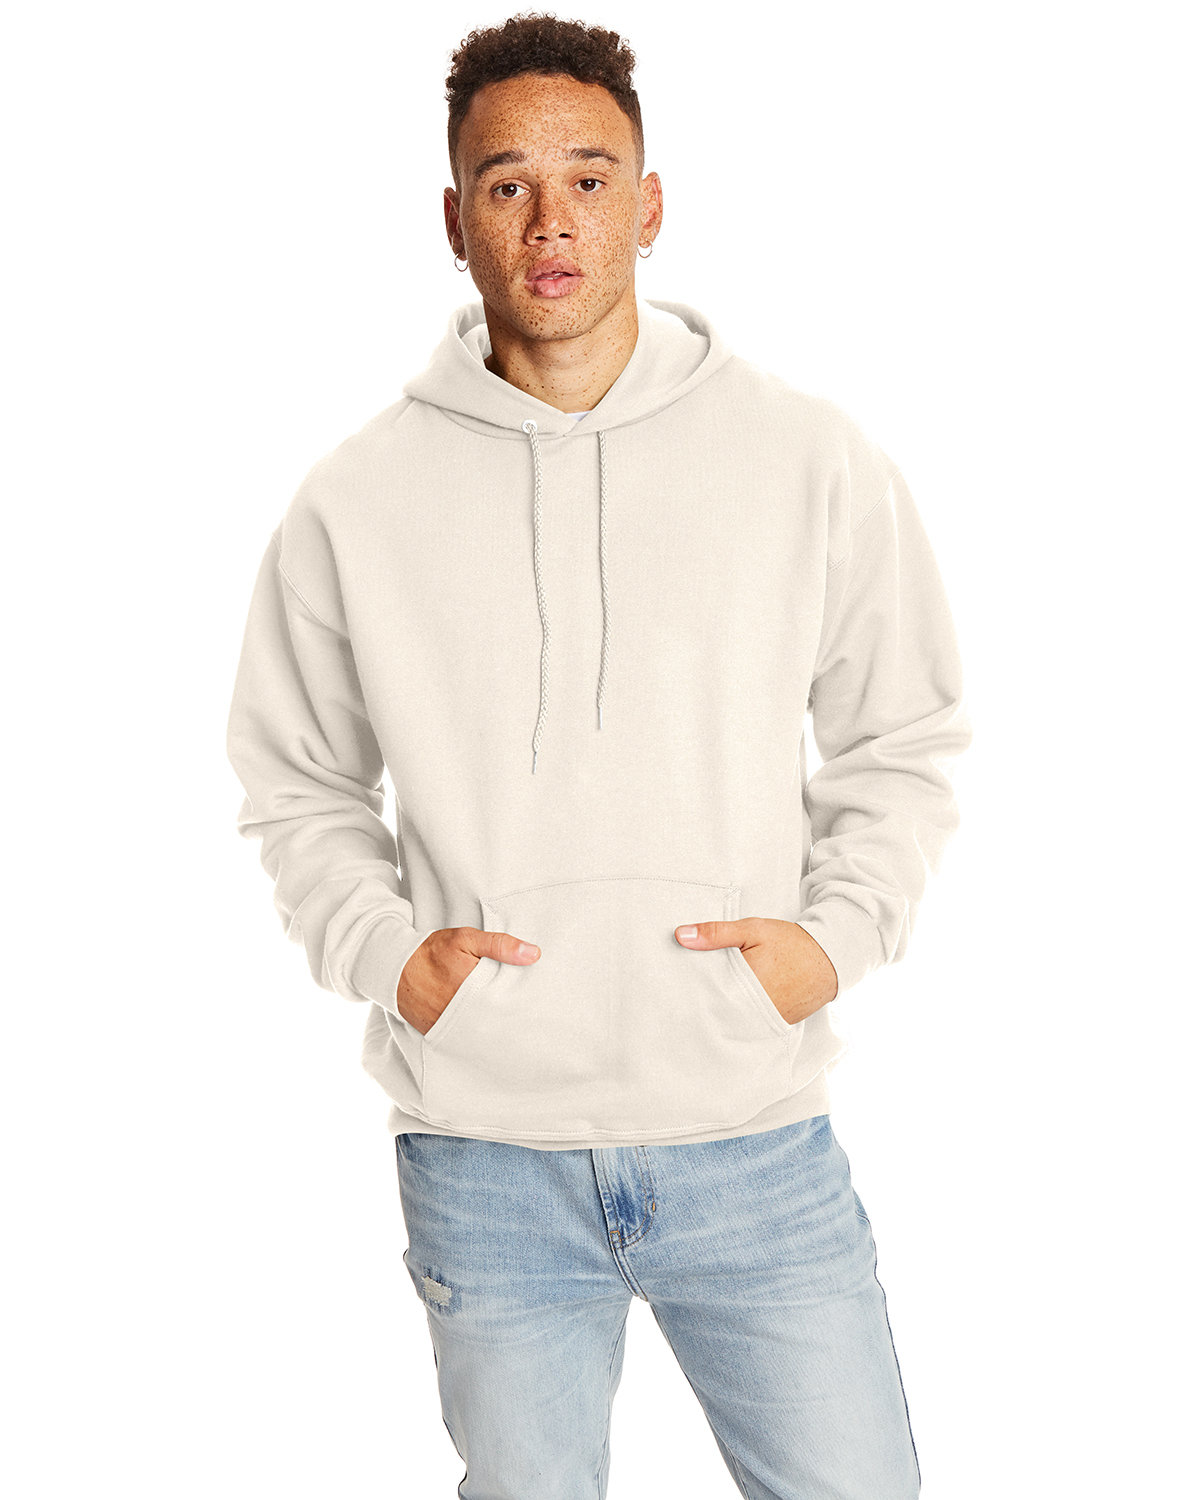 Hanes Adult 9.7 oz. Ultimate Cotton® 90/10 Pullover Hooded Sweatshirt NATURAL 